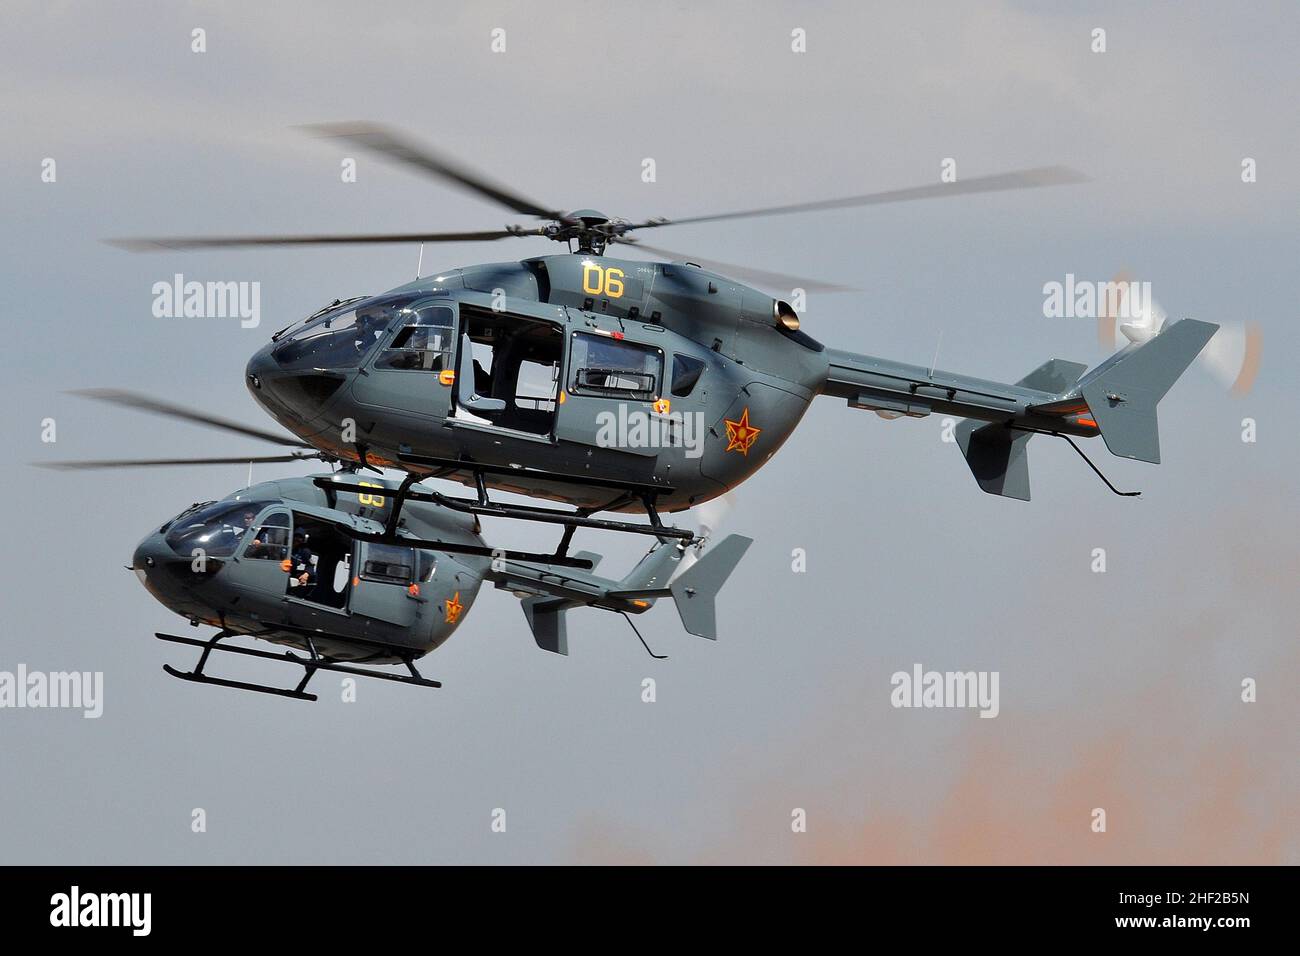 KAZAKHSTAN AIR FORCE EC145 HELICOPTERS IN SUPPORT OF GROUND TROOPS. Stock Photo